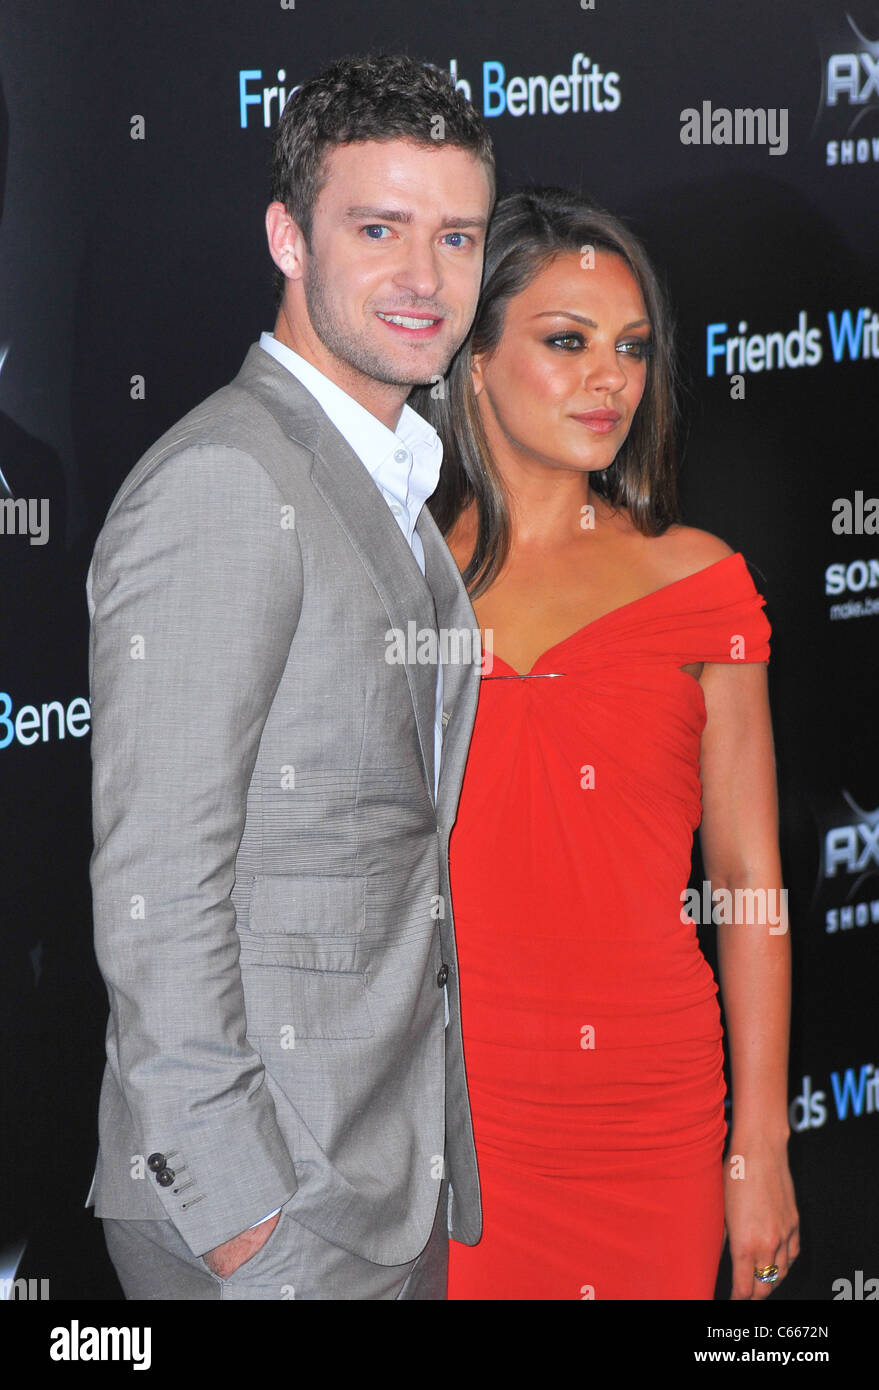 Justin Timberlake, Mila Kunis at arrivals for FRIENDS WITH BENEFITS Premiere, The Ziegfeld Theatre, New York, NY July 18, 2011. Stock Photo